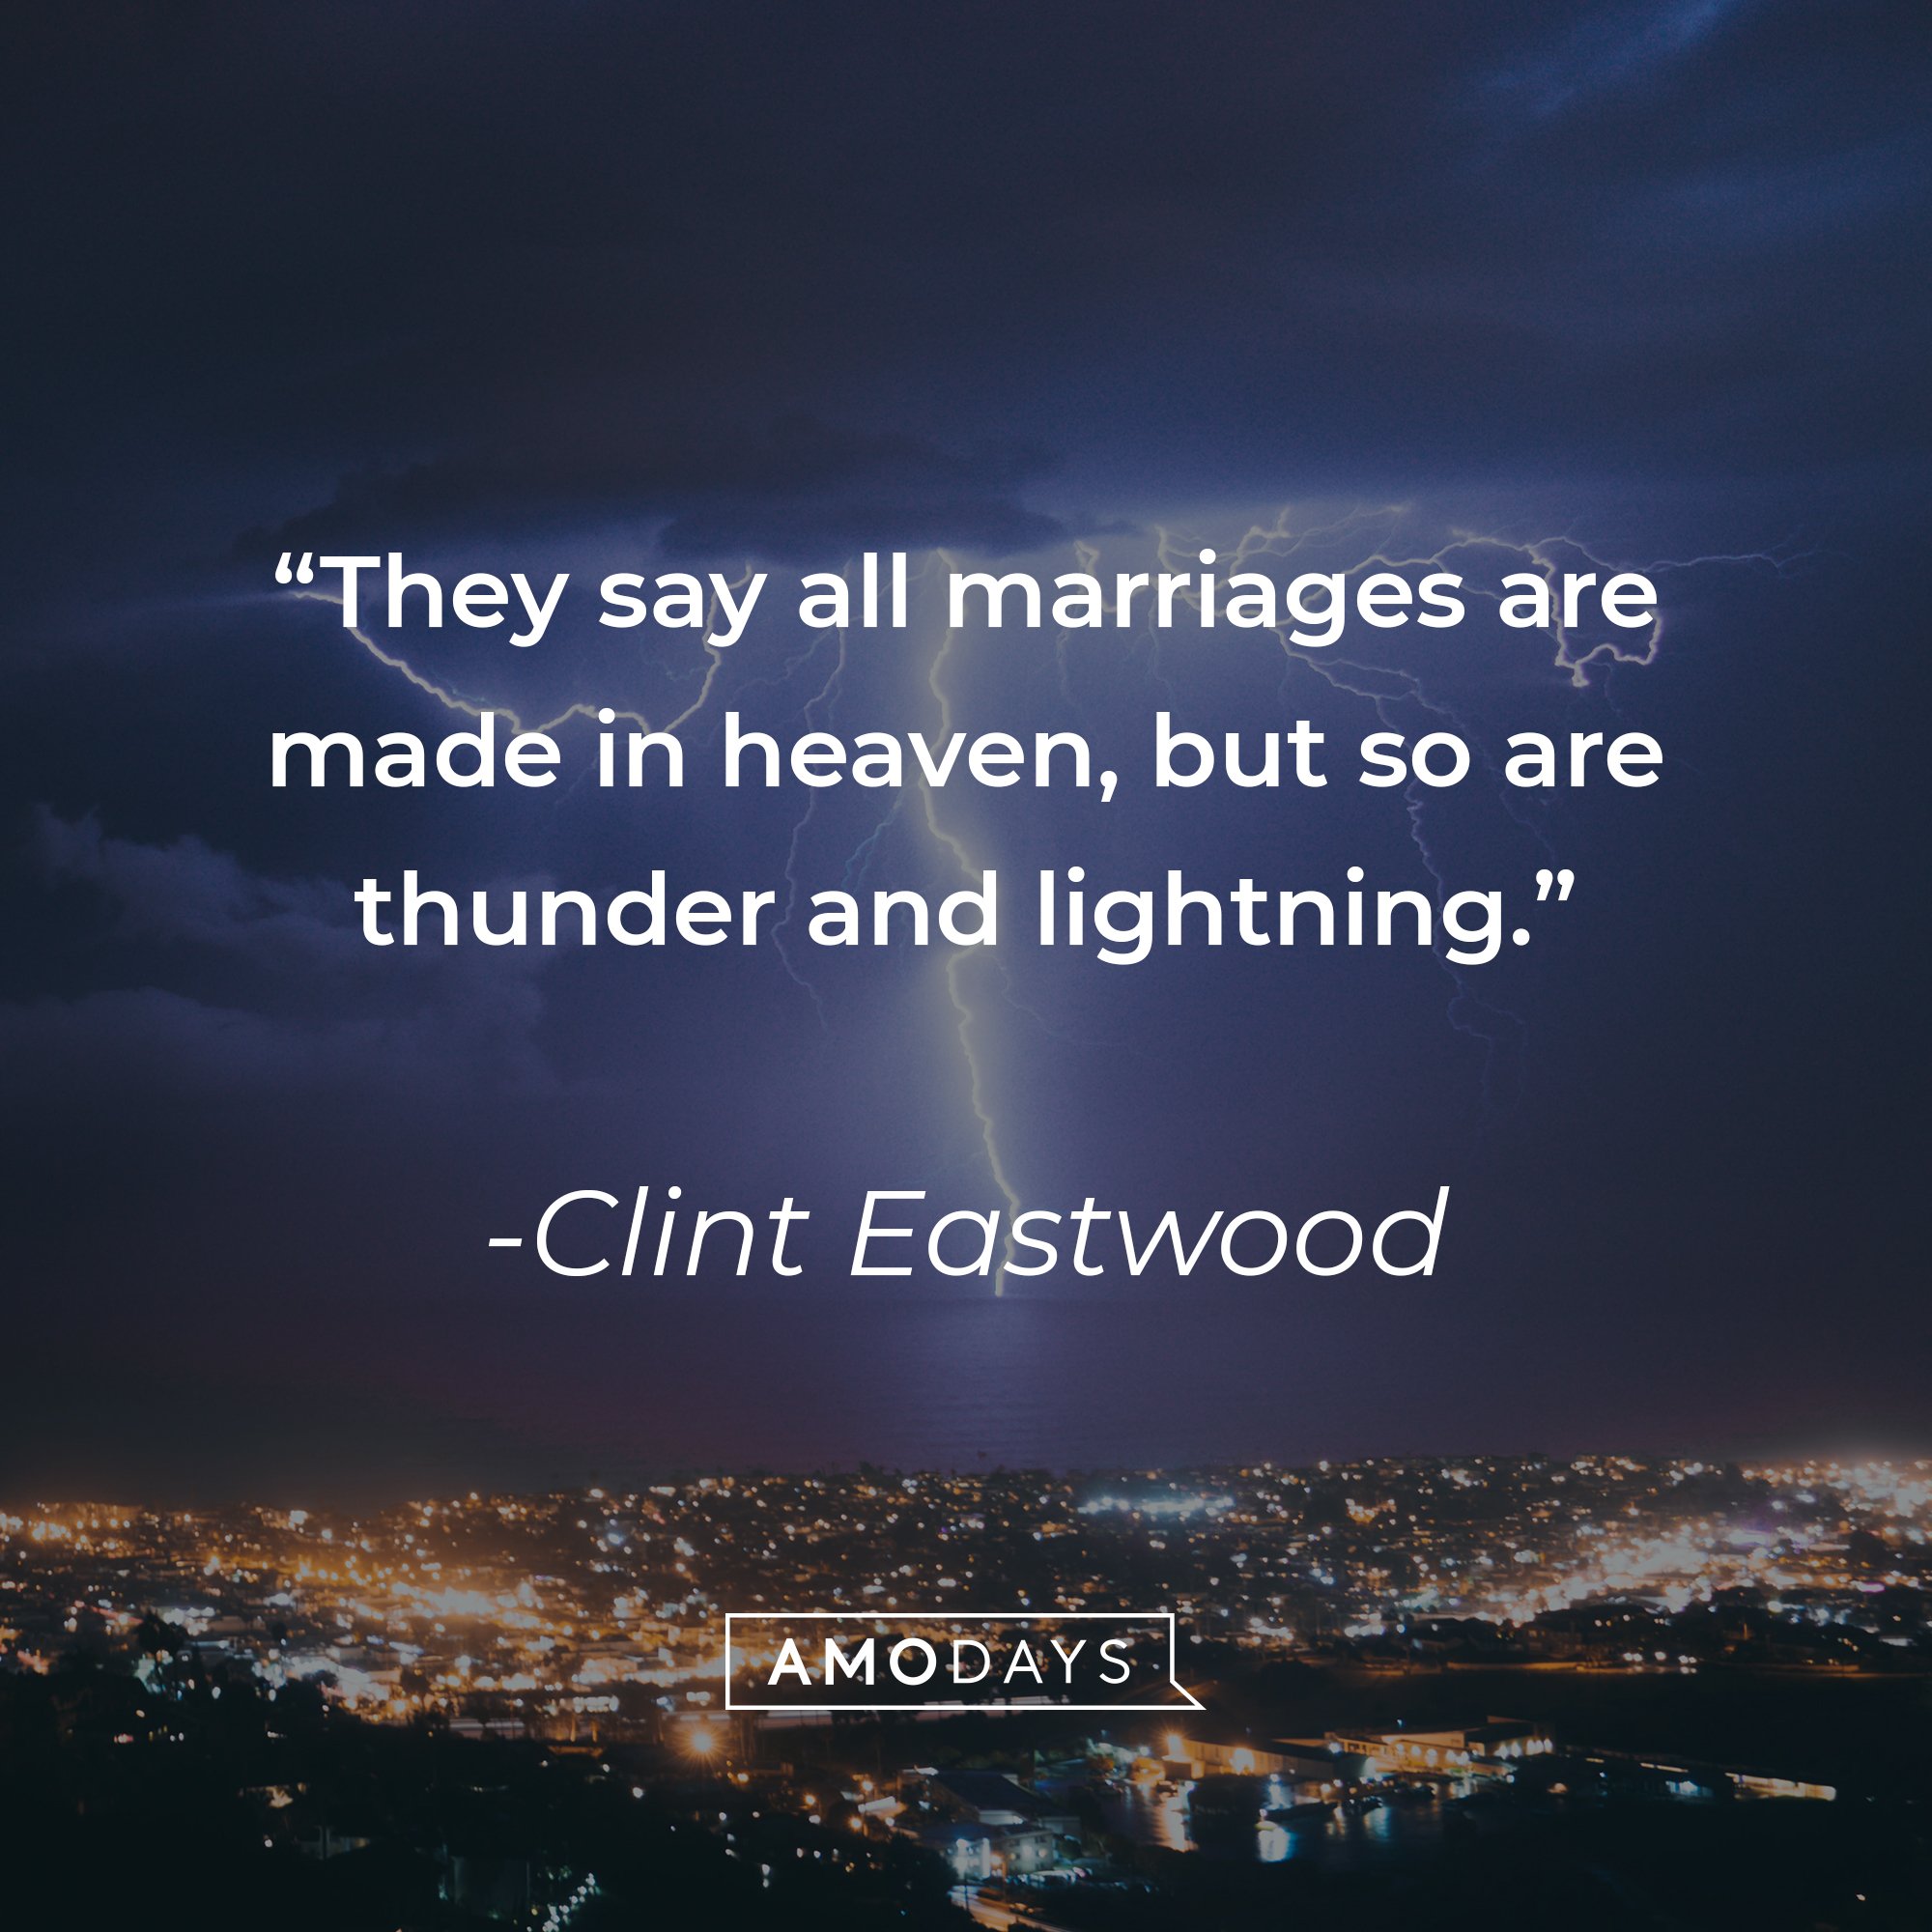 Clint Eastwood’s quote: "They say all marriages are made in heaven, but so are thunder and lightning." | Image: AmoDays